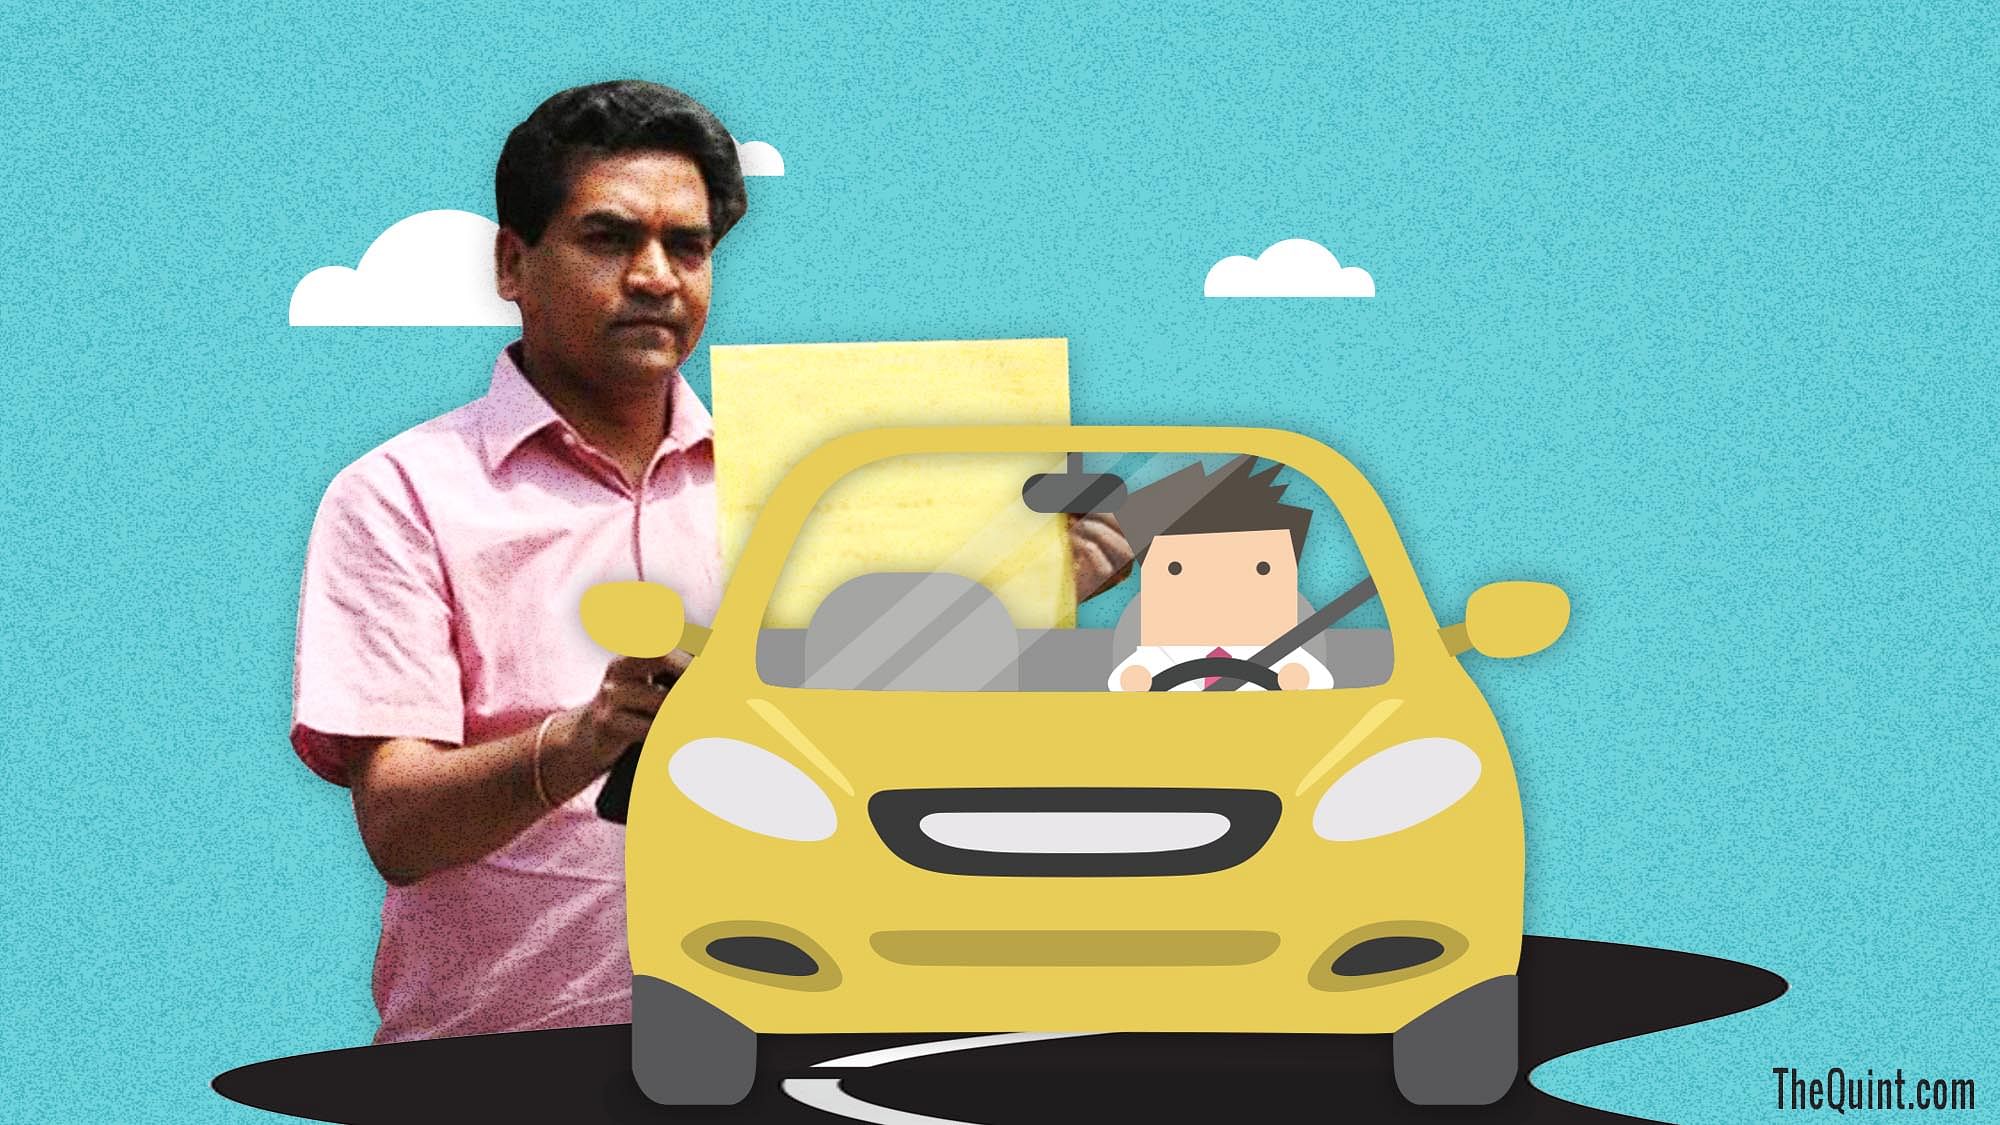 Kapil Mishra’s driver told another driver that his boss would be Delhi CM soon, leading to Arvind Kejriwal uncovering the coup plot. (Photo: Harsh Sahni/<b>The Quint</b>)